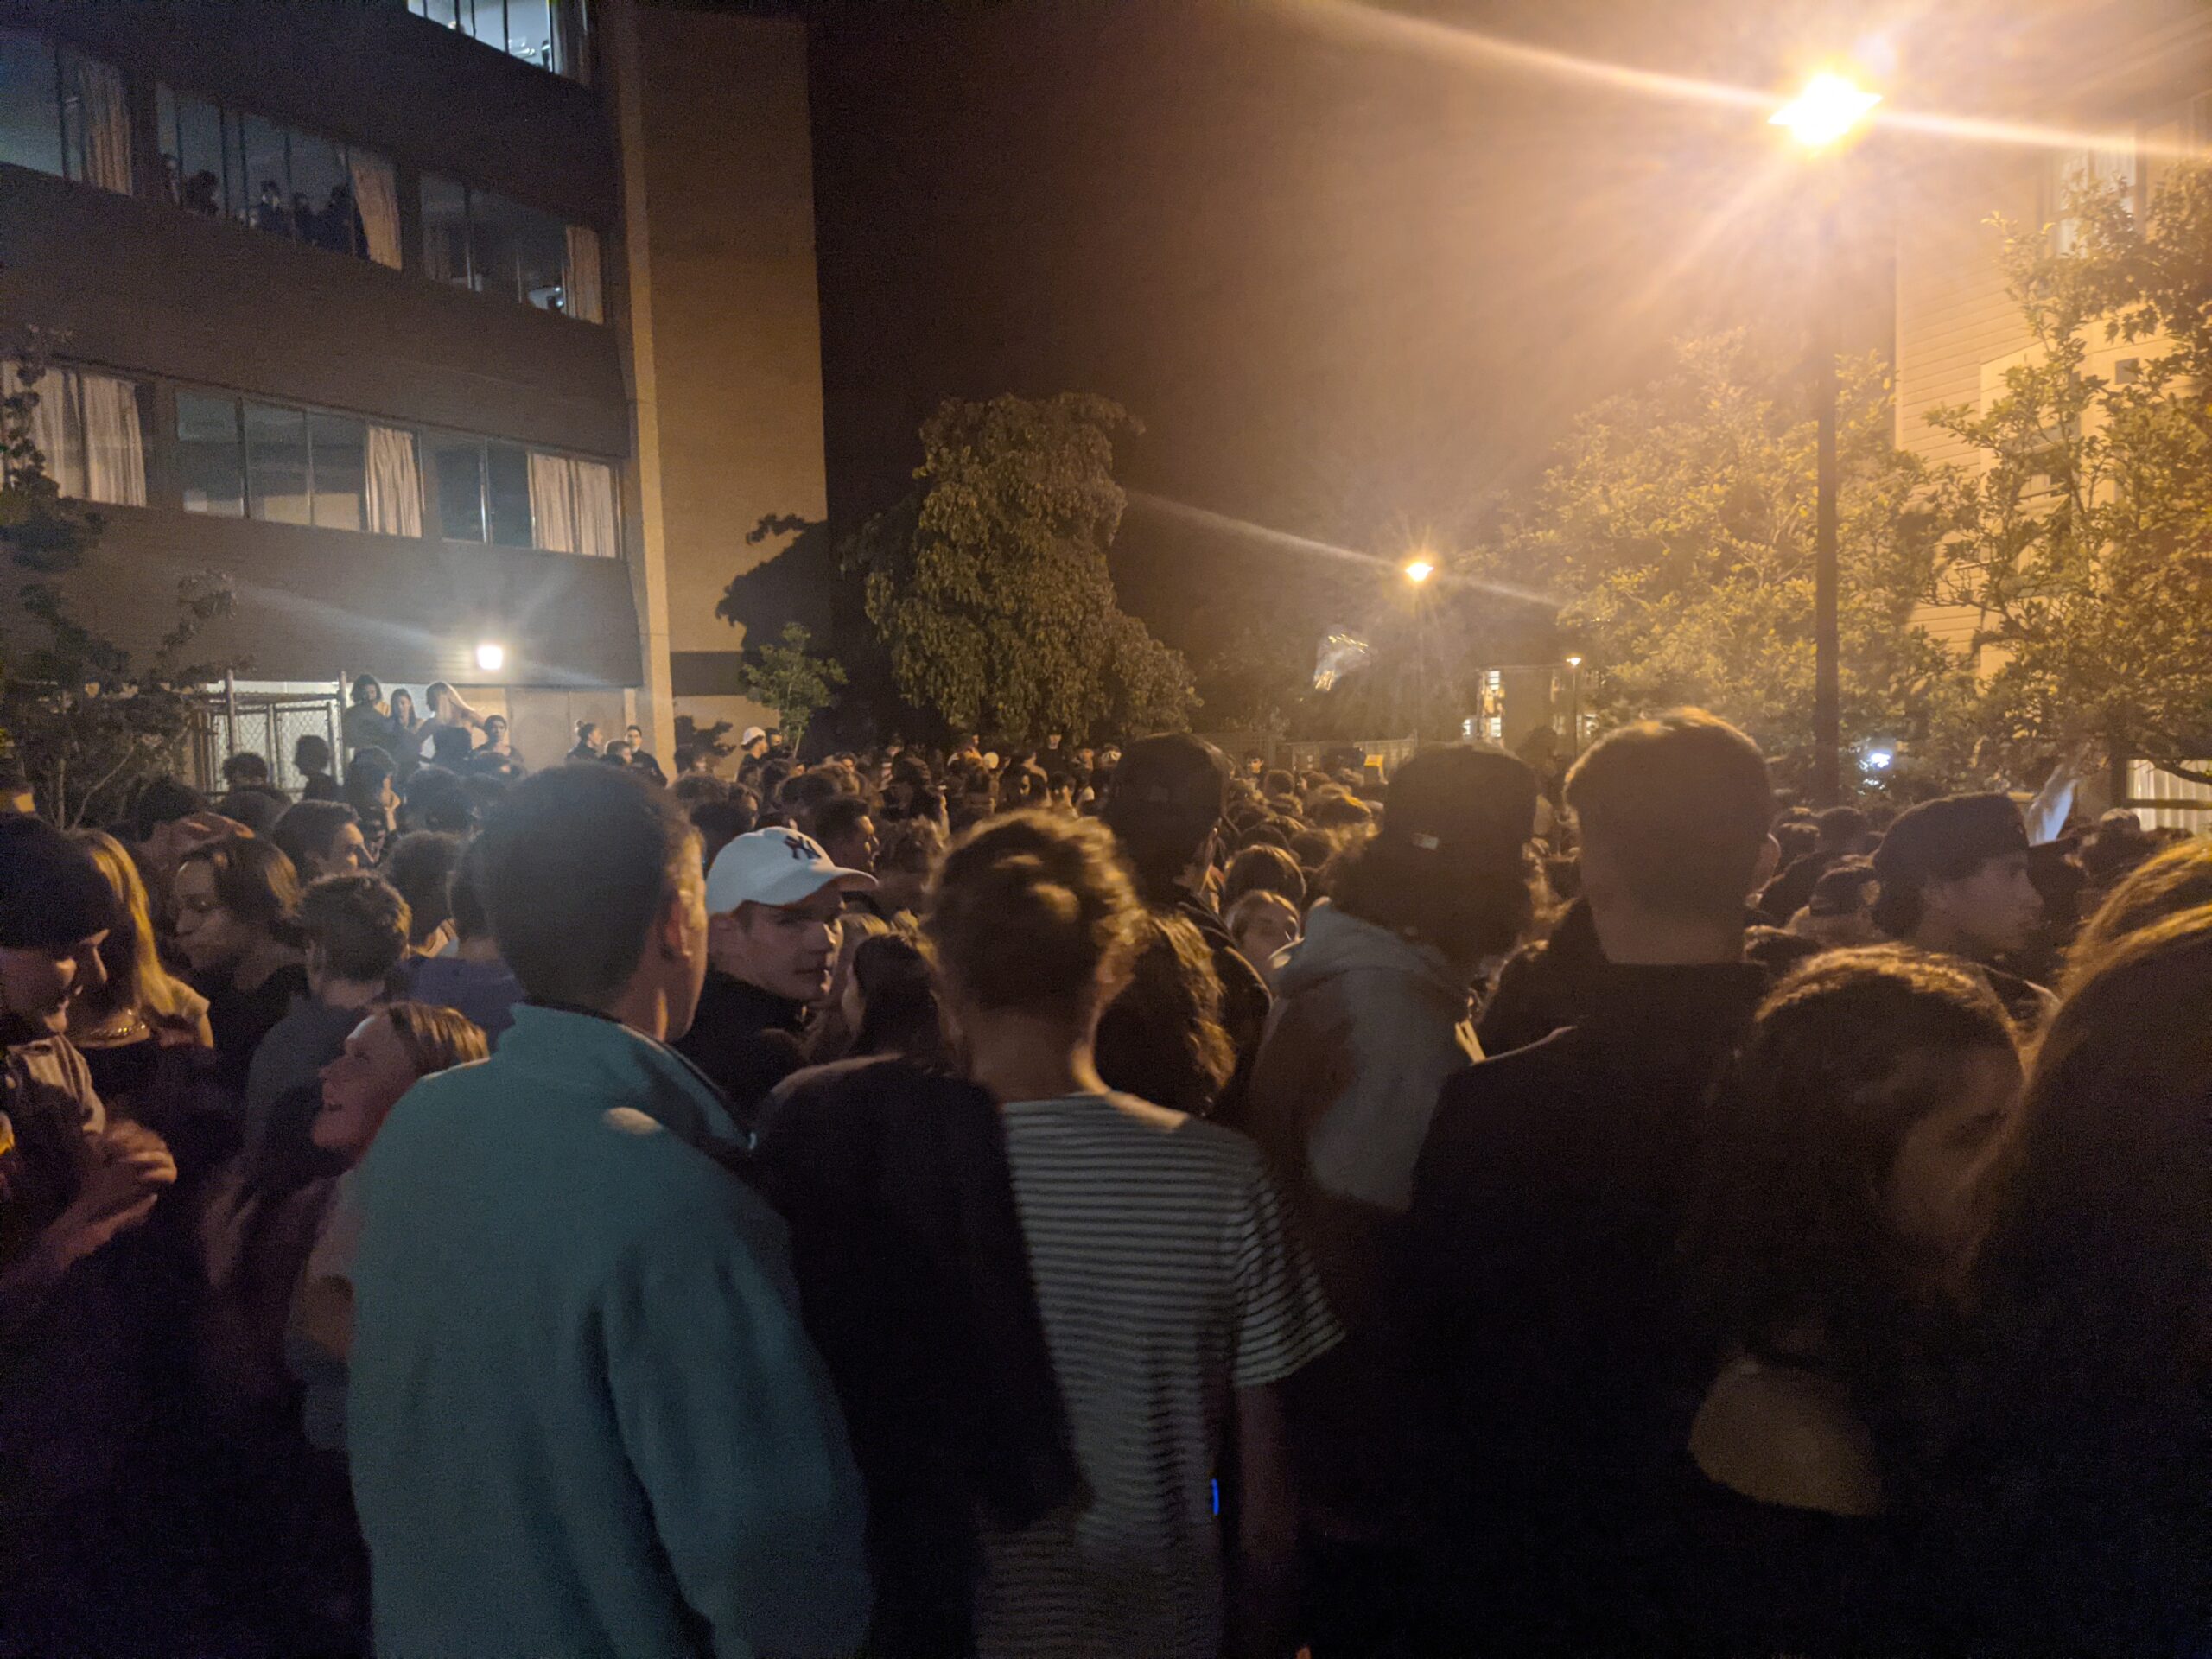 Over 800 students attended a party at UVic residences after move-in day